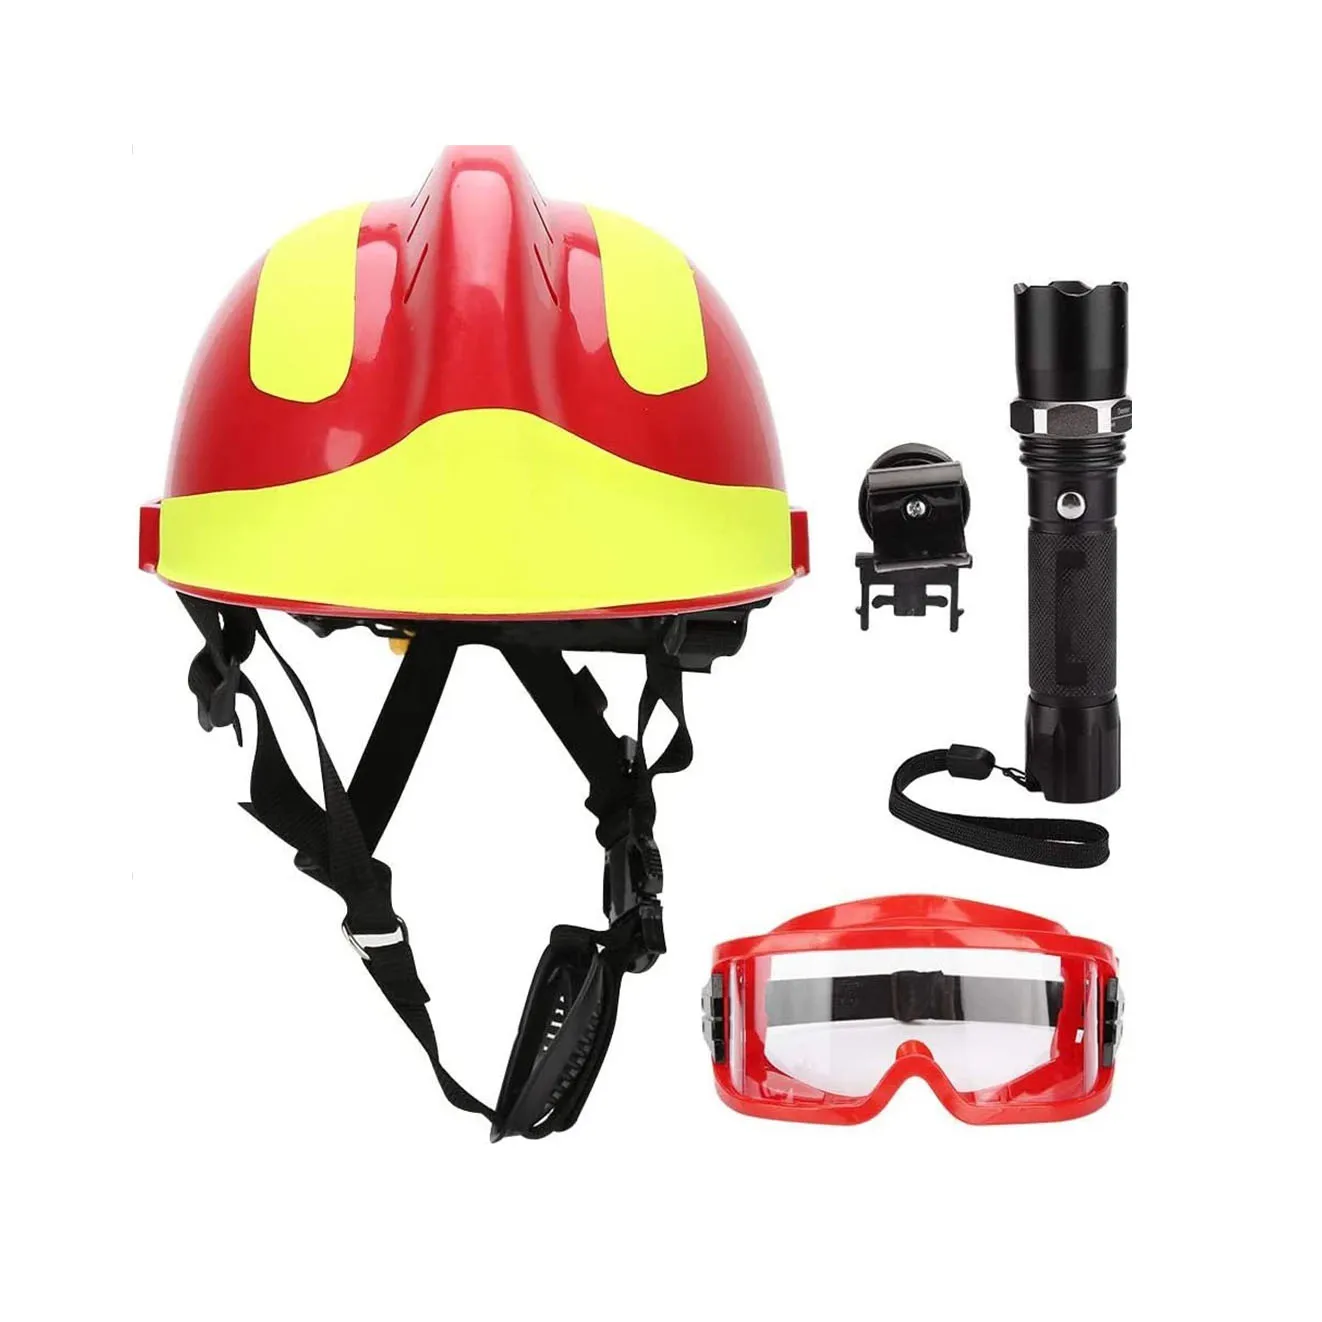 

Fire Protection Hard Hat Accessories Safety Construction F2 Emergency Rescue Firefighter Safety Helmets For Workplace